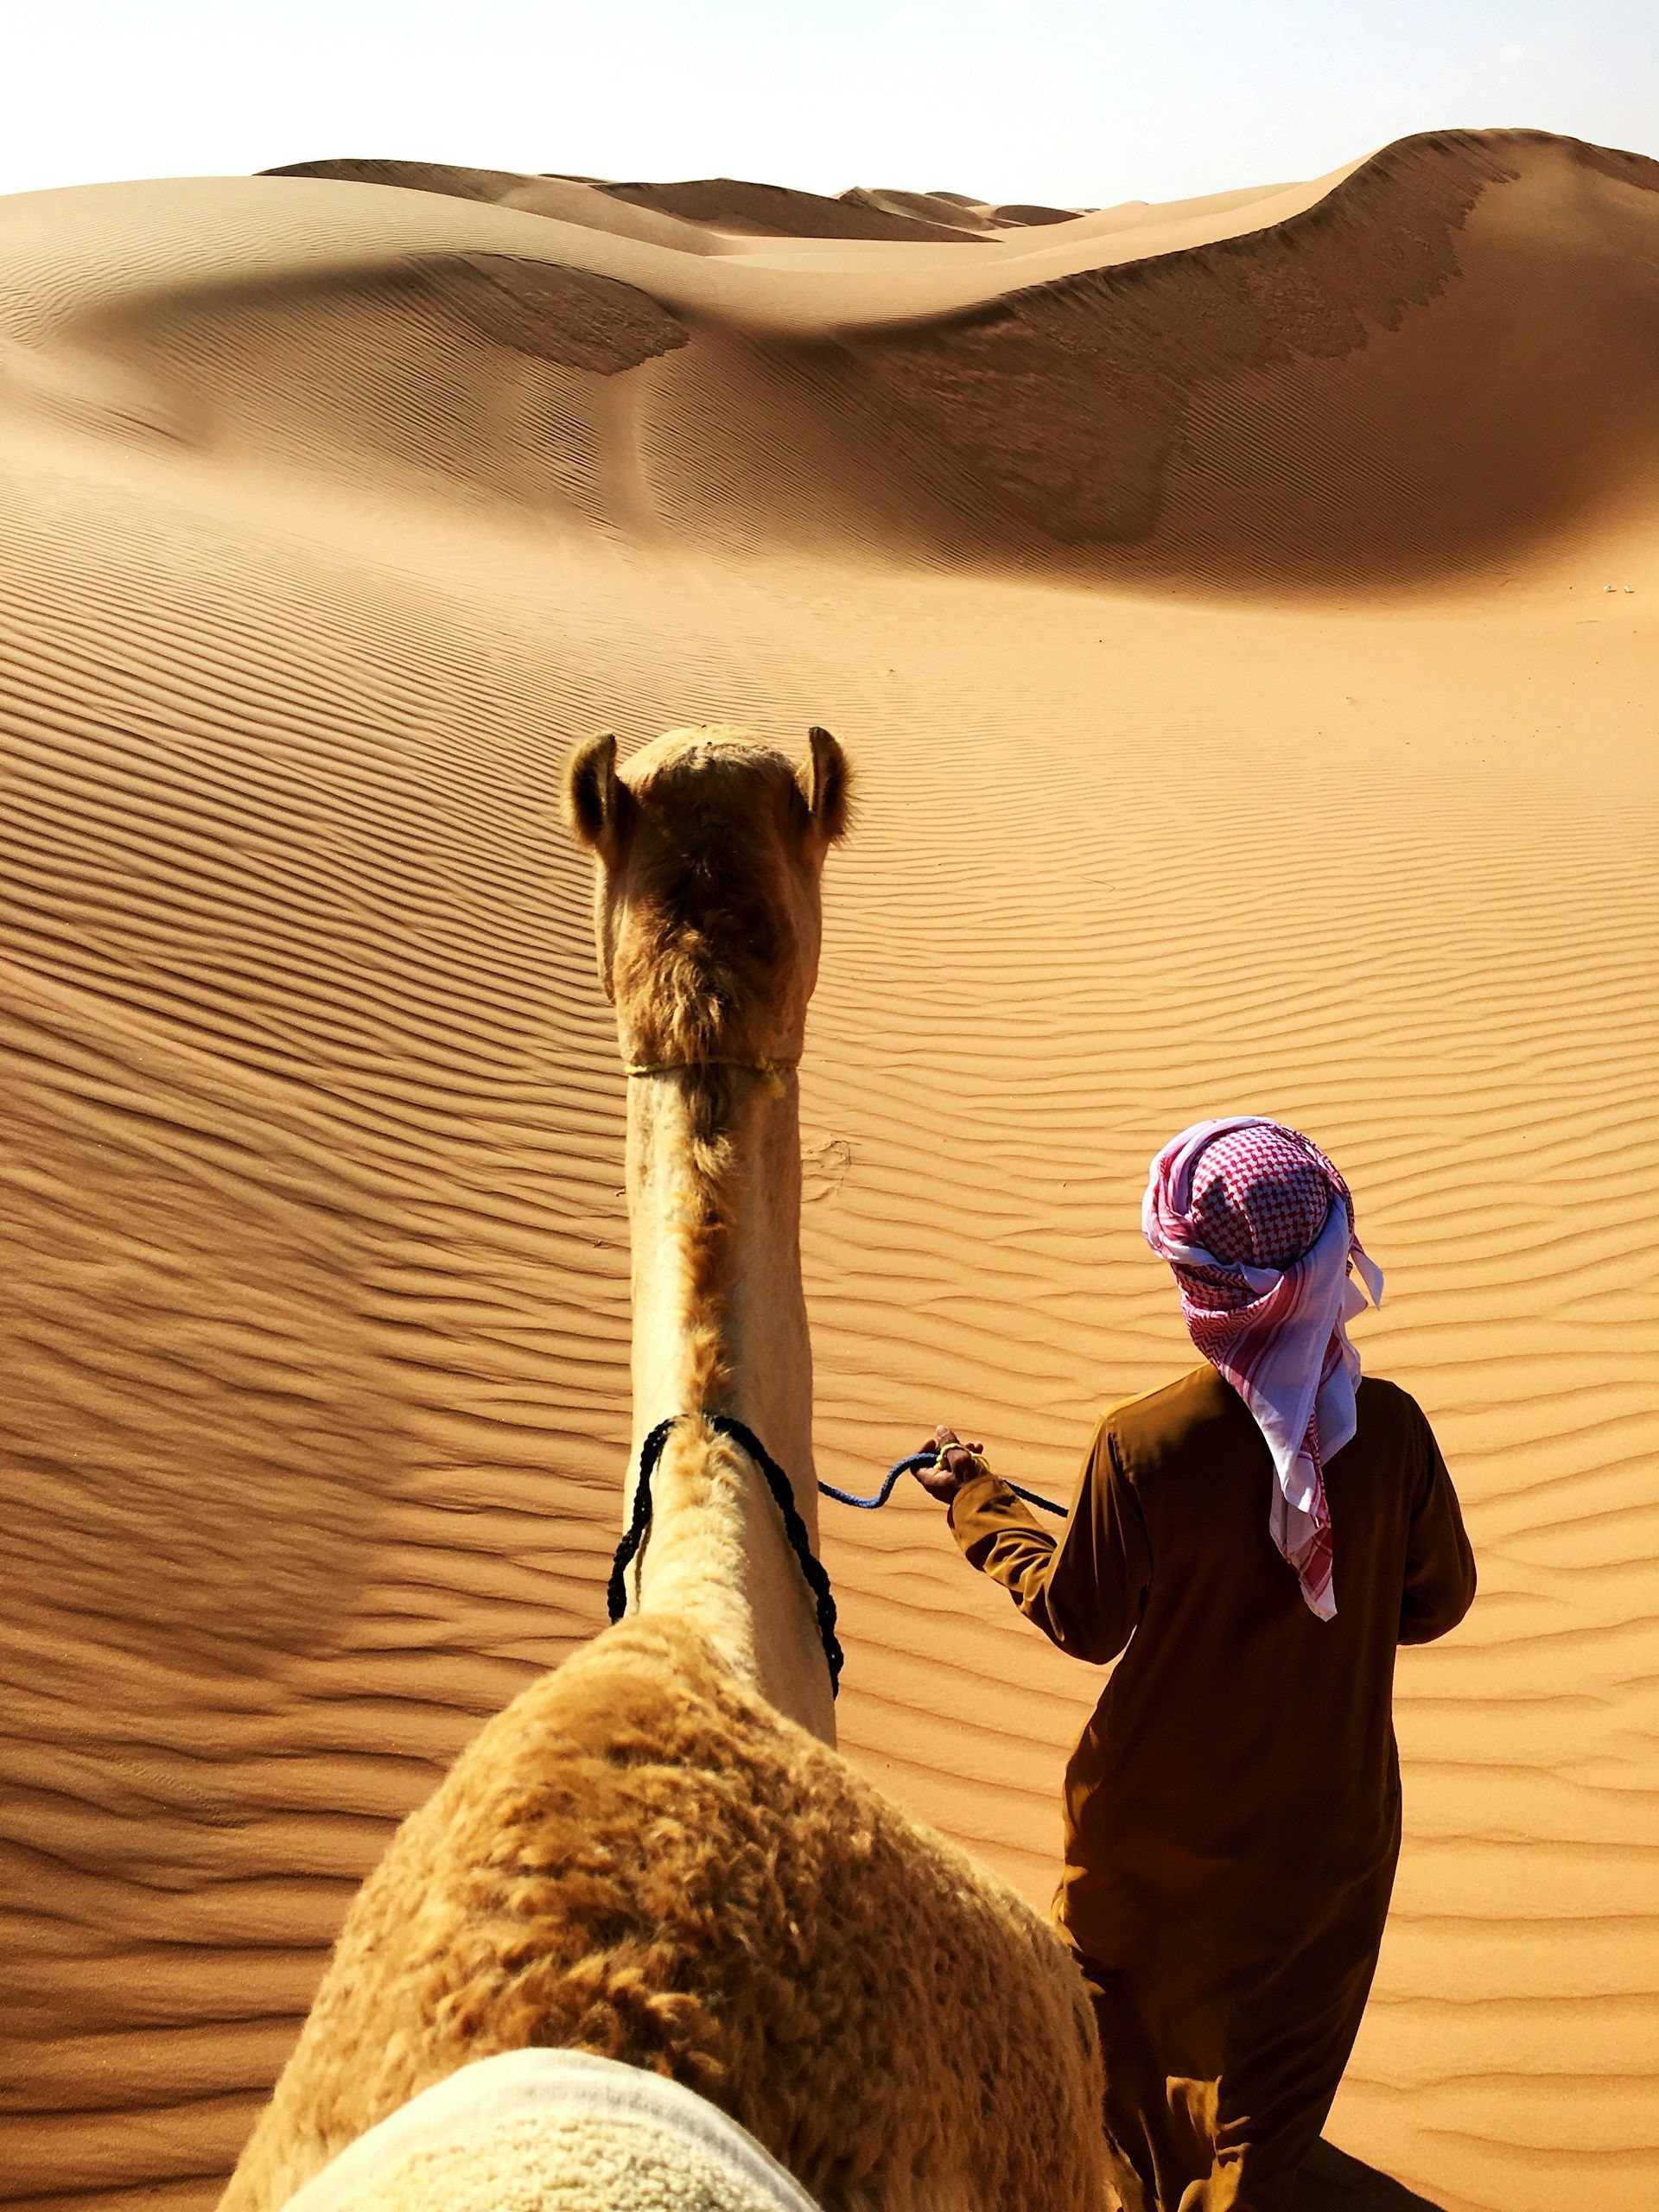 A man is leading a camel through the desert